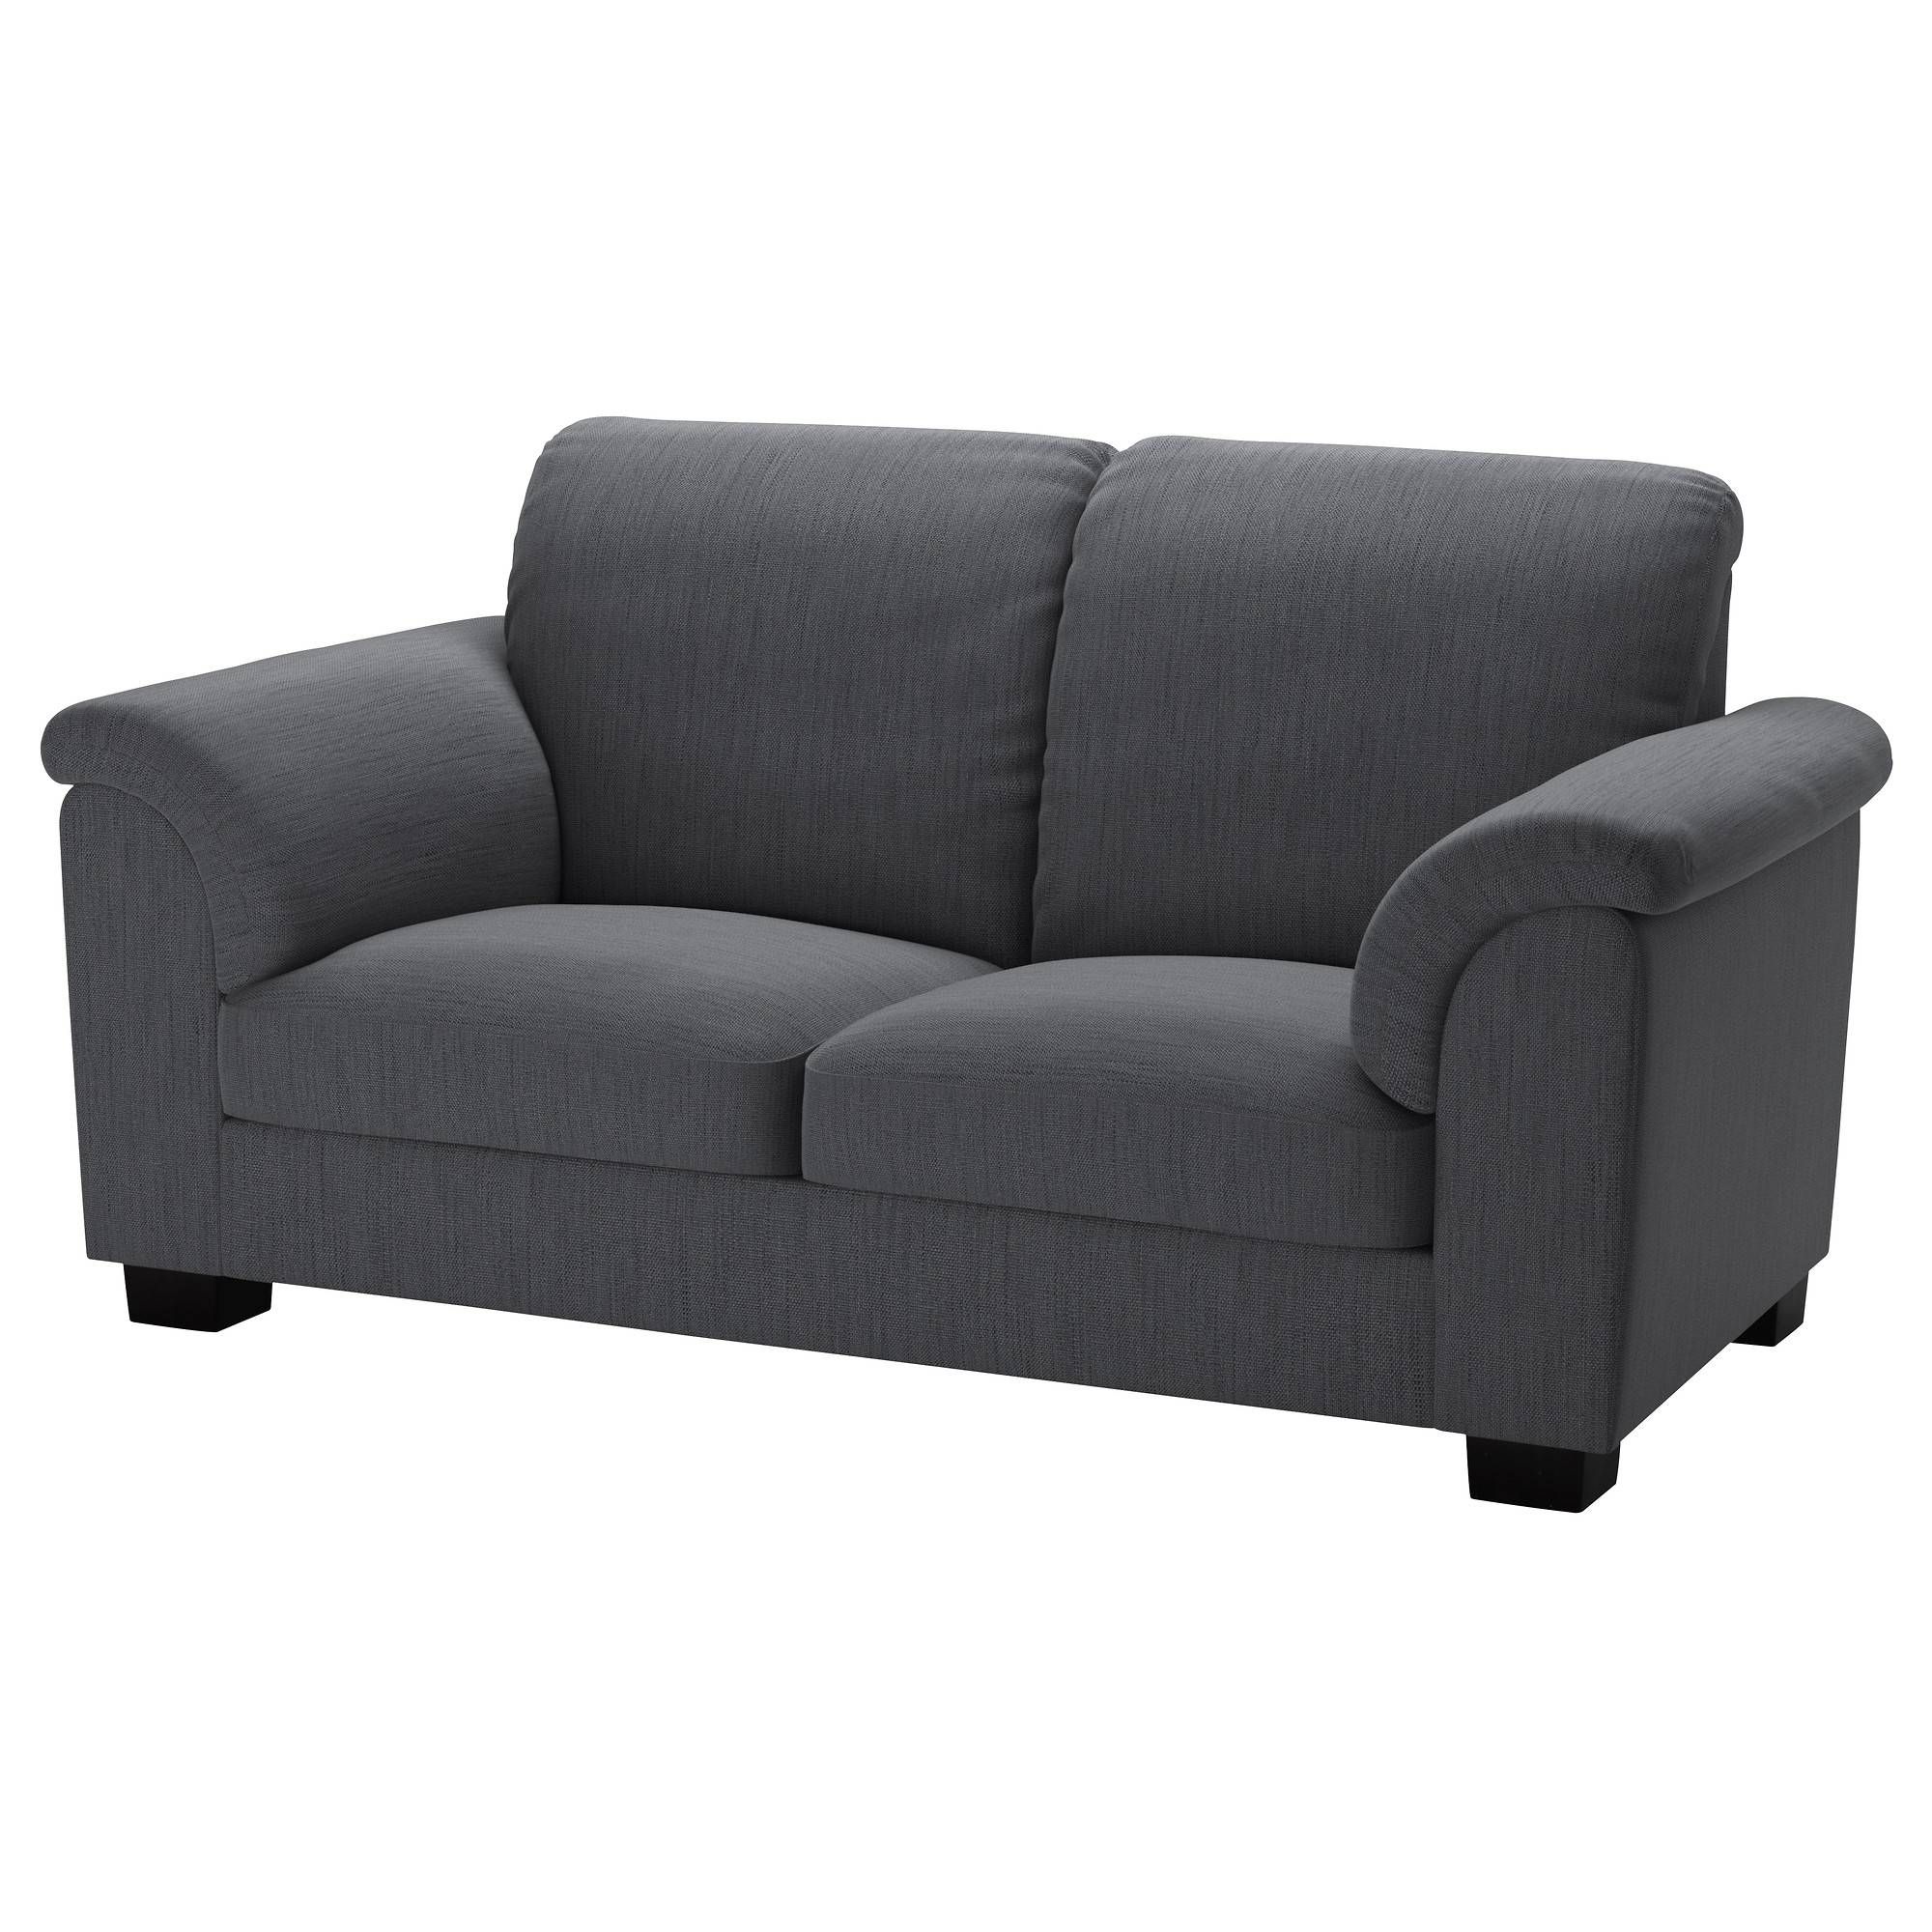 Sofas | Ikea Ireland – Dublin Intended For Sofas With High Backs (Photo 3 of 30)